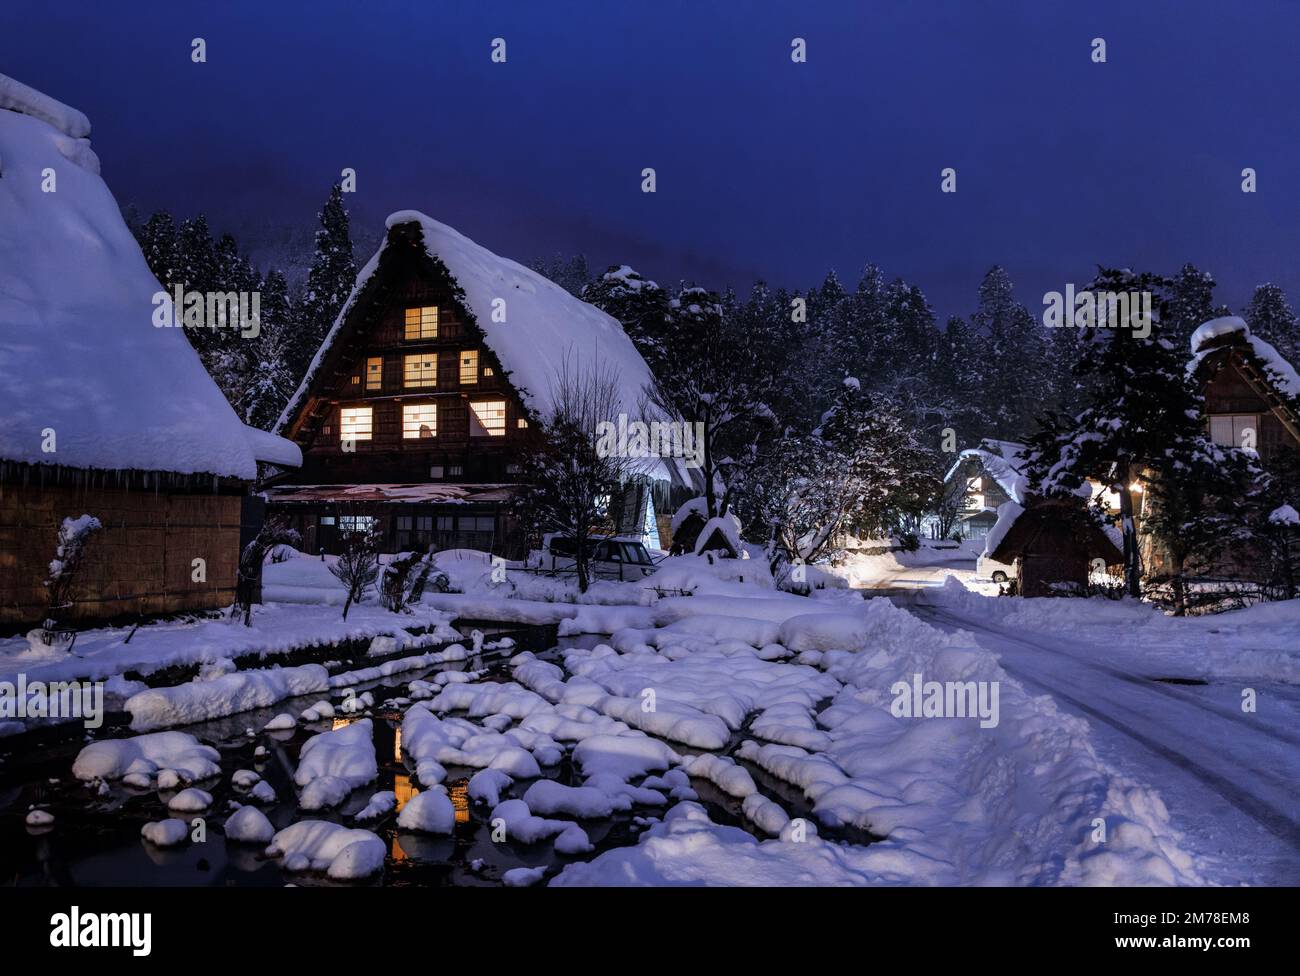 Snow covered Japanese farmhouse in historic village by woods at night  Stock Photo